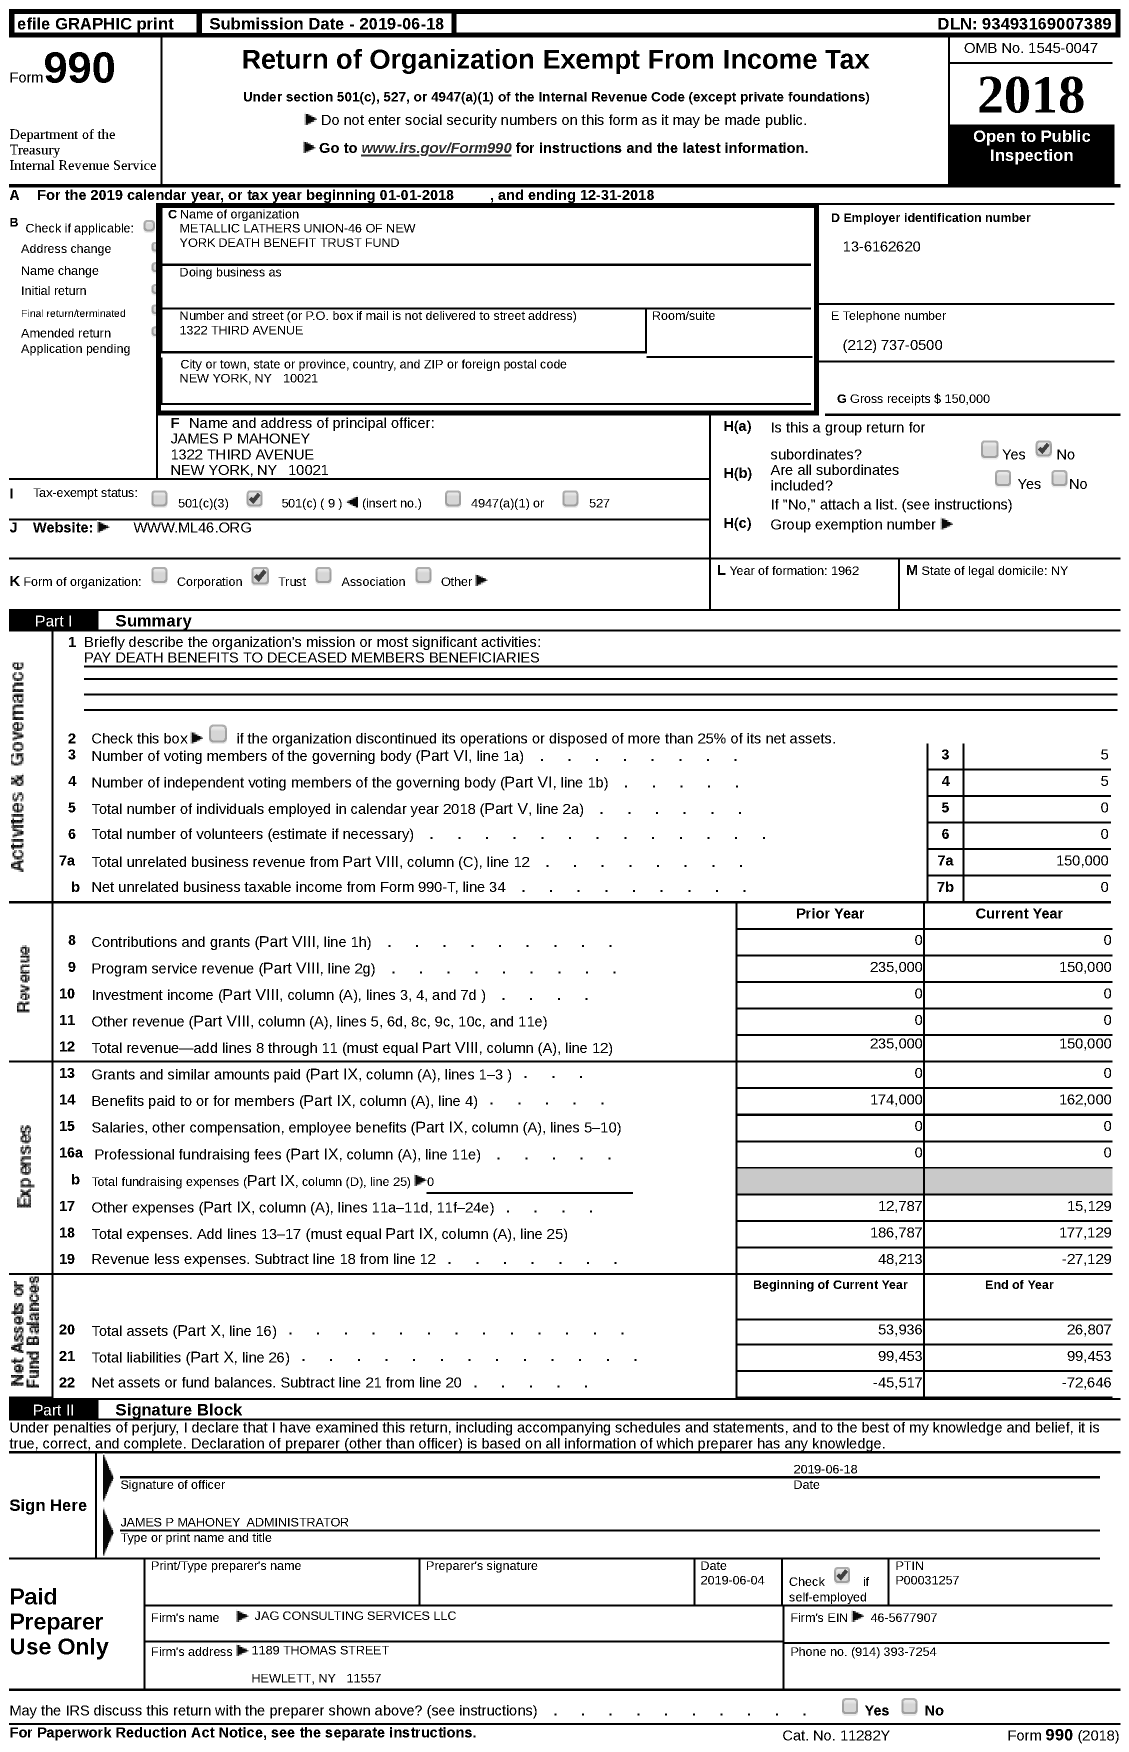 Image of first page of 2018 Form 990 for Metallic Lathers Union-46 of New York Death Benefit Trust Fund